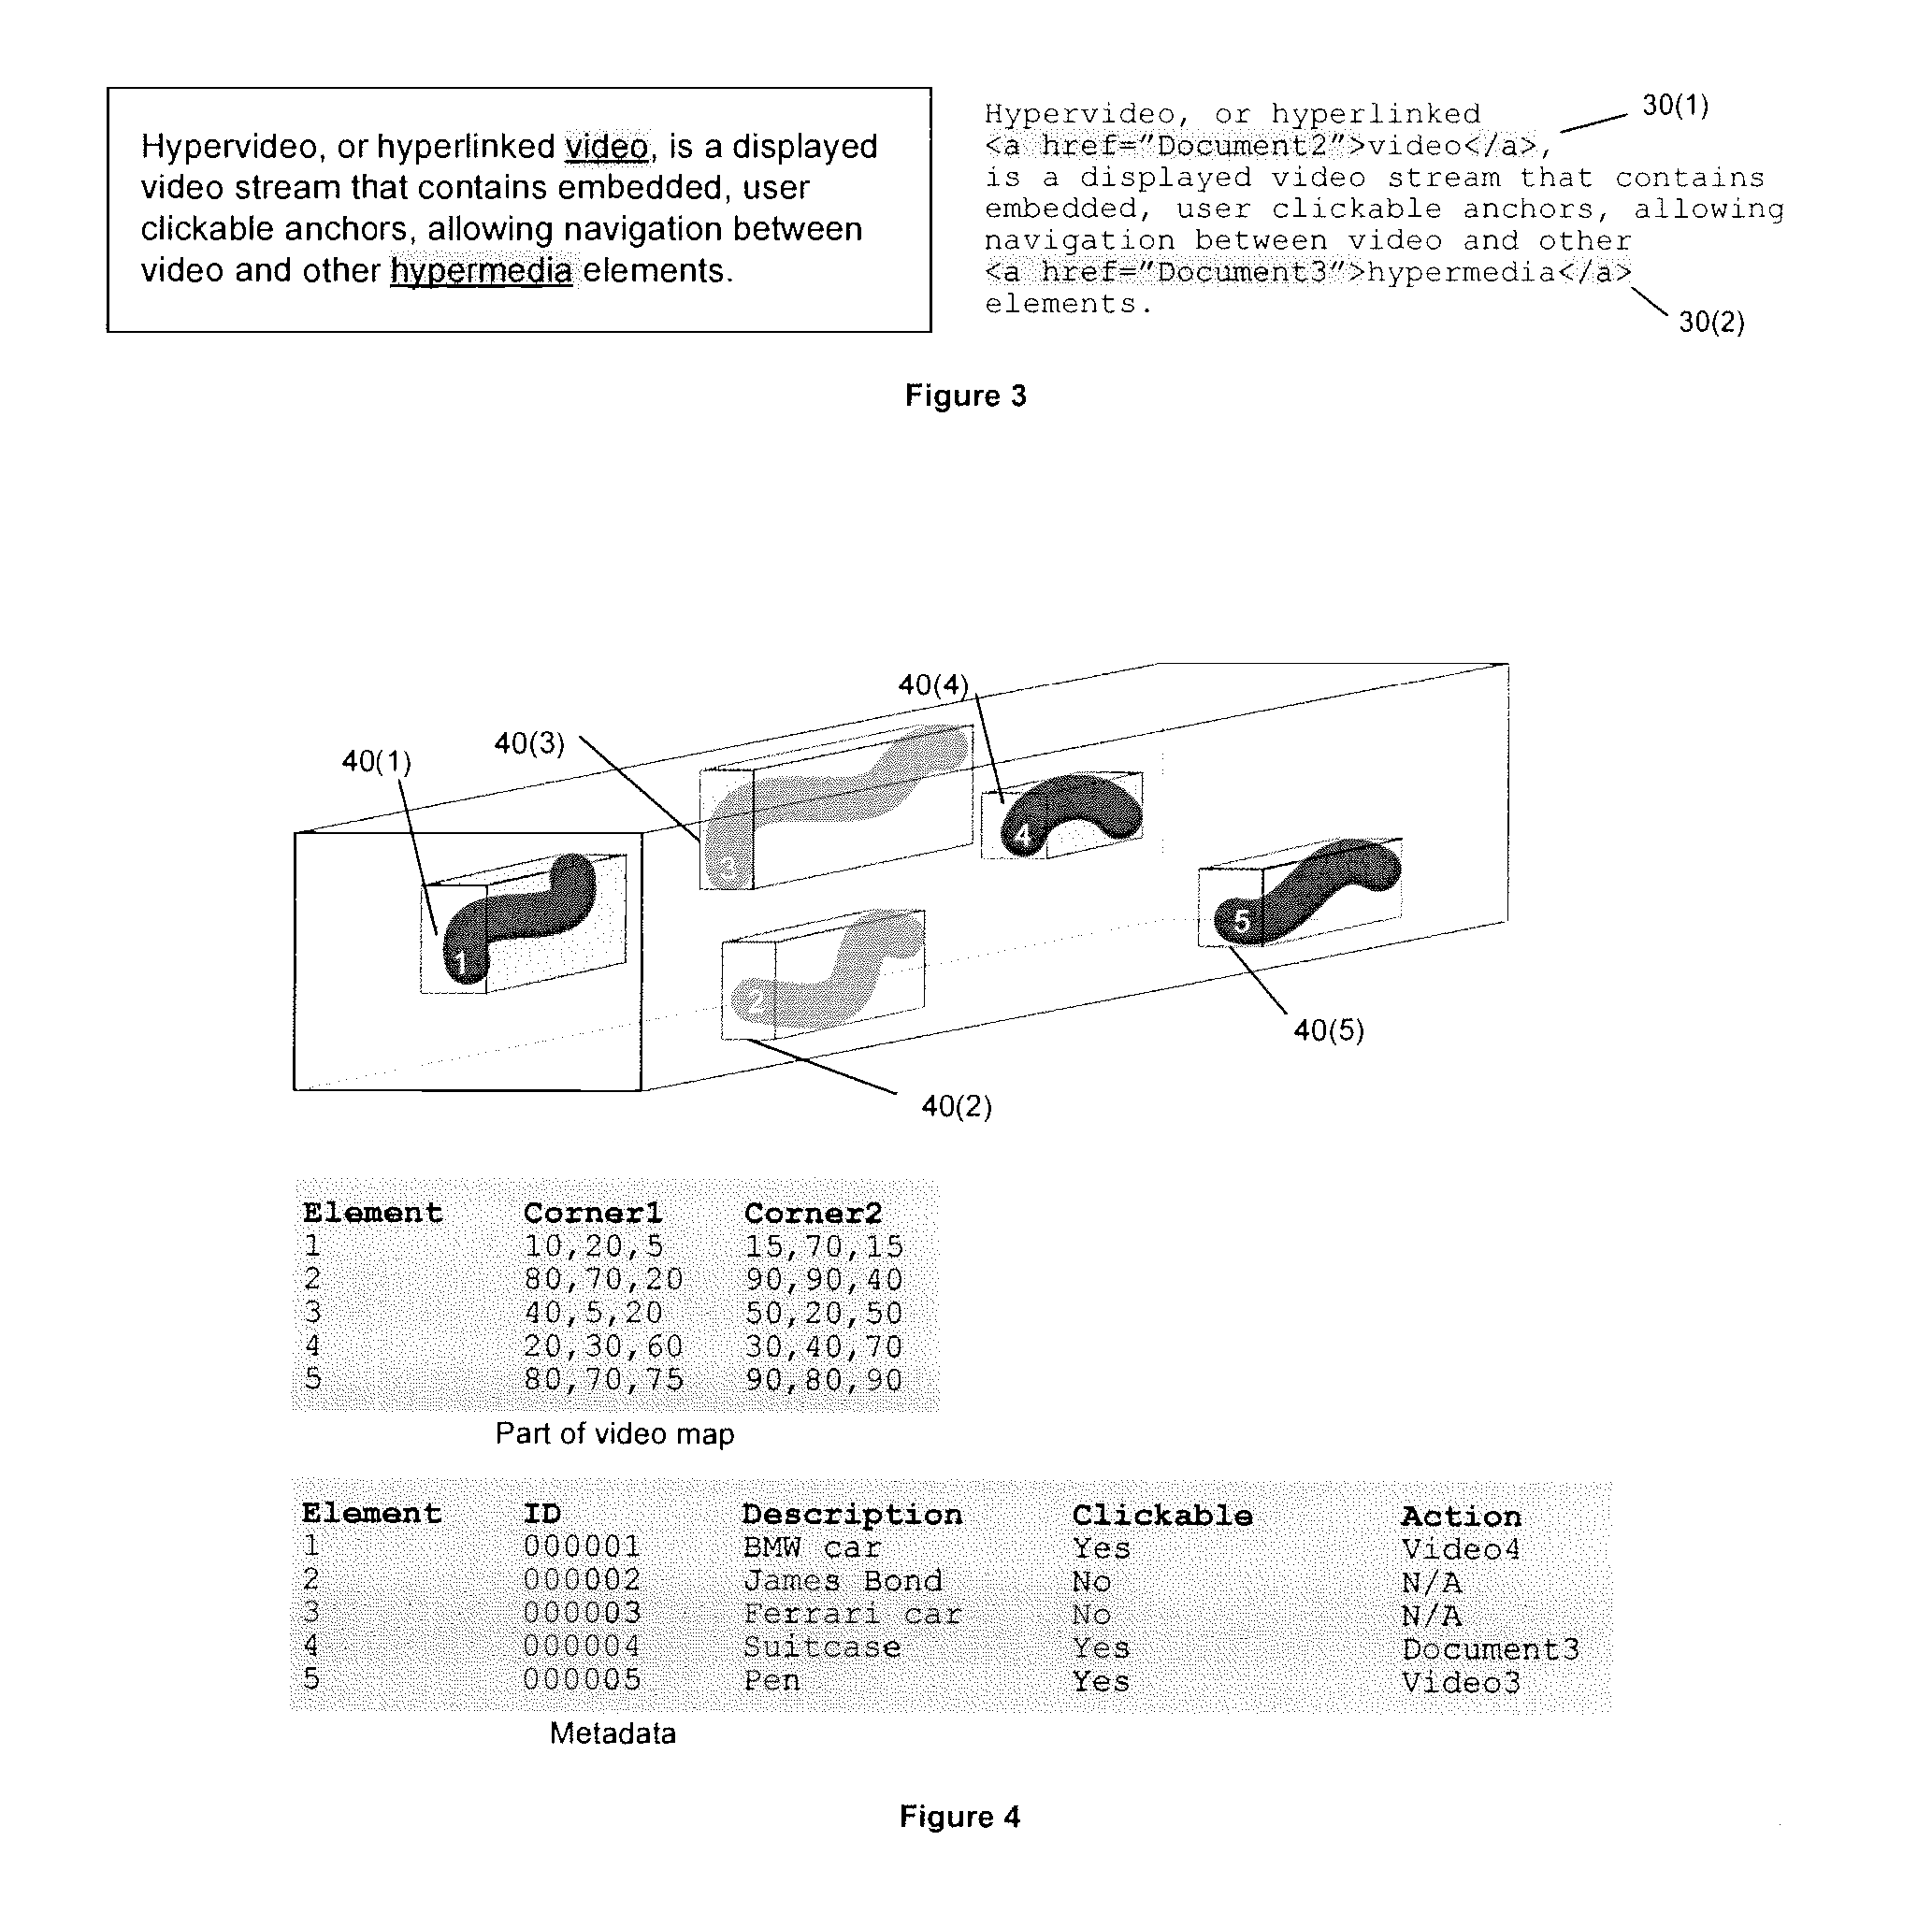 Method and Apparatus for Generation, Distribution and Display of Interactive Video Content